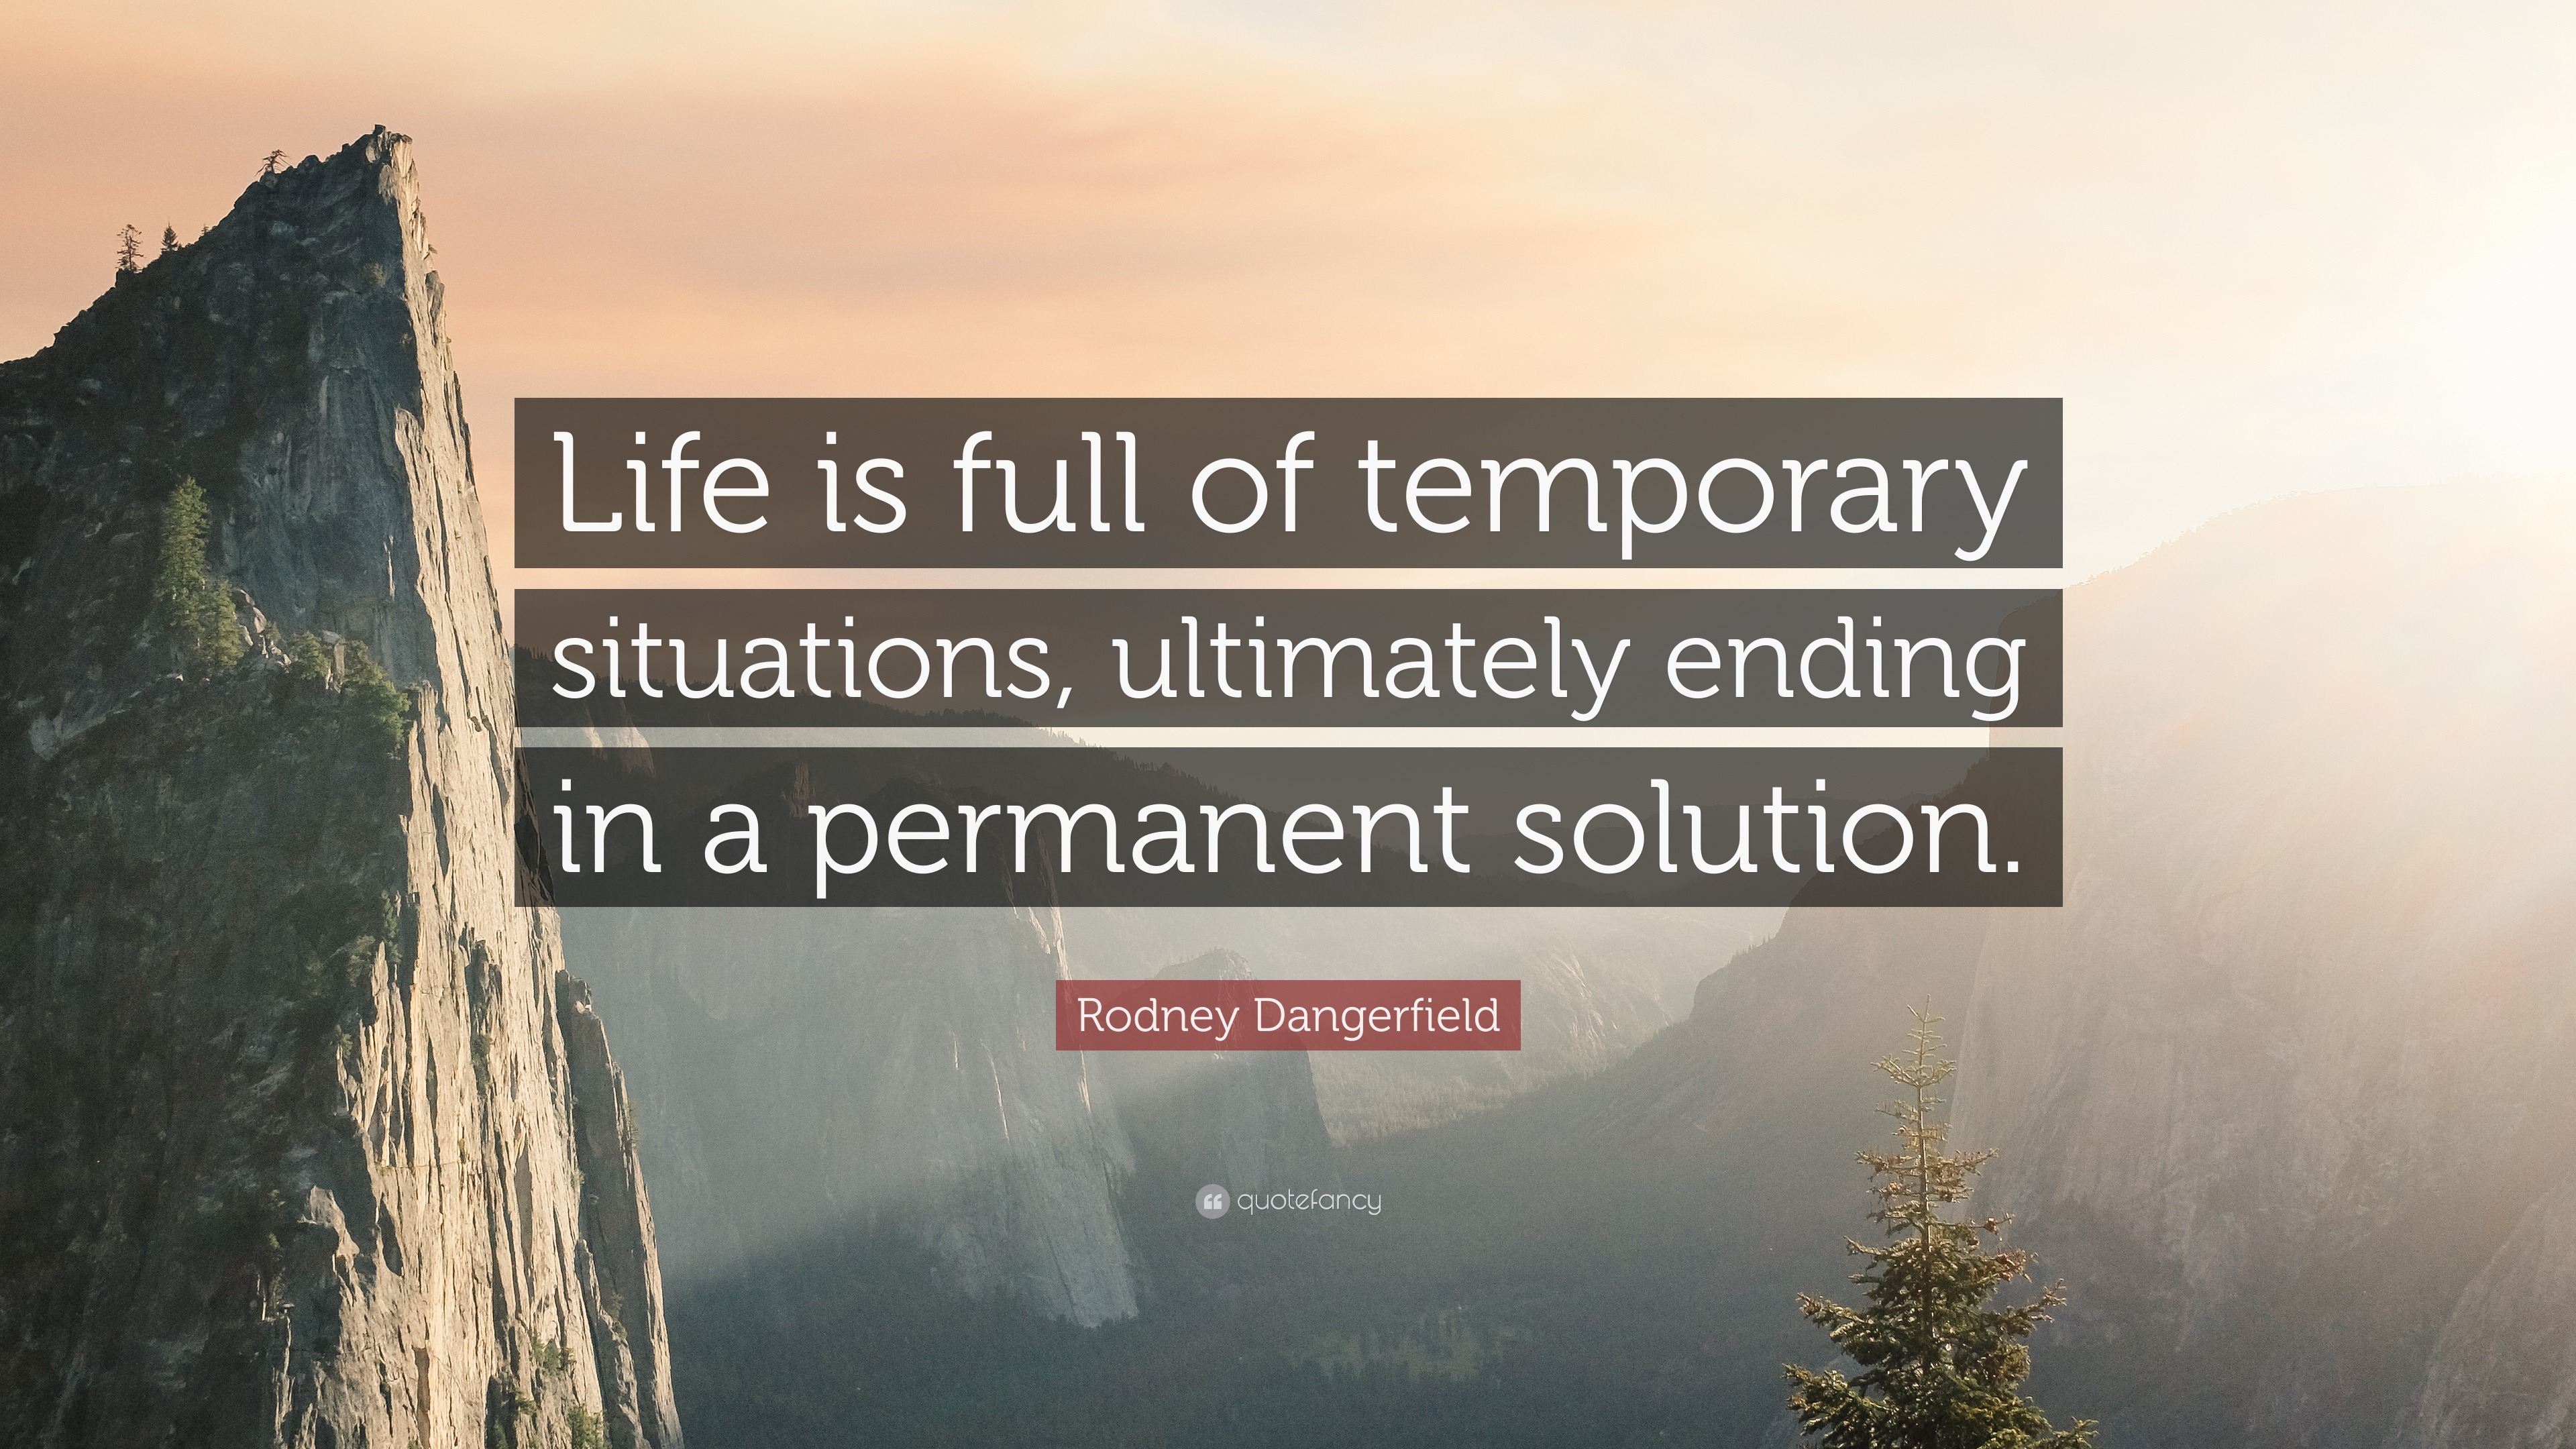 Rodney Dangerfield Quote: “Life is full of temporary situations ...